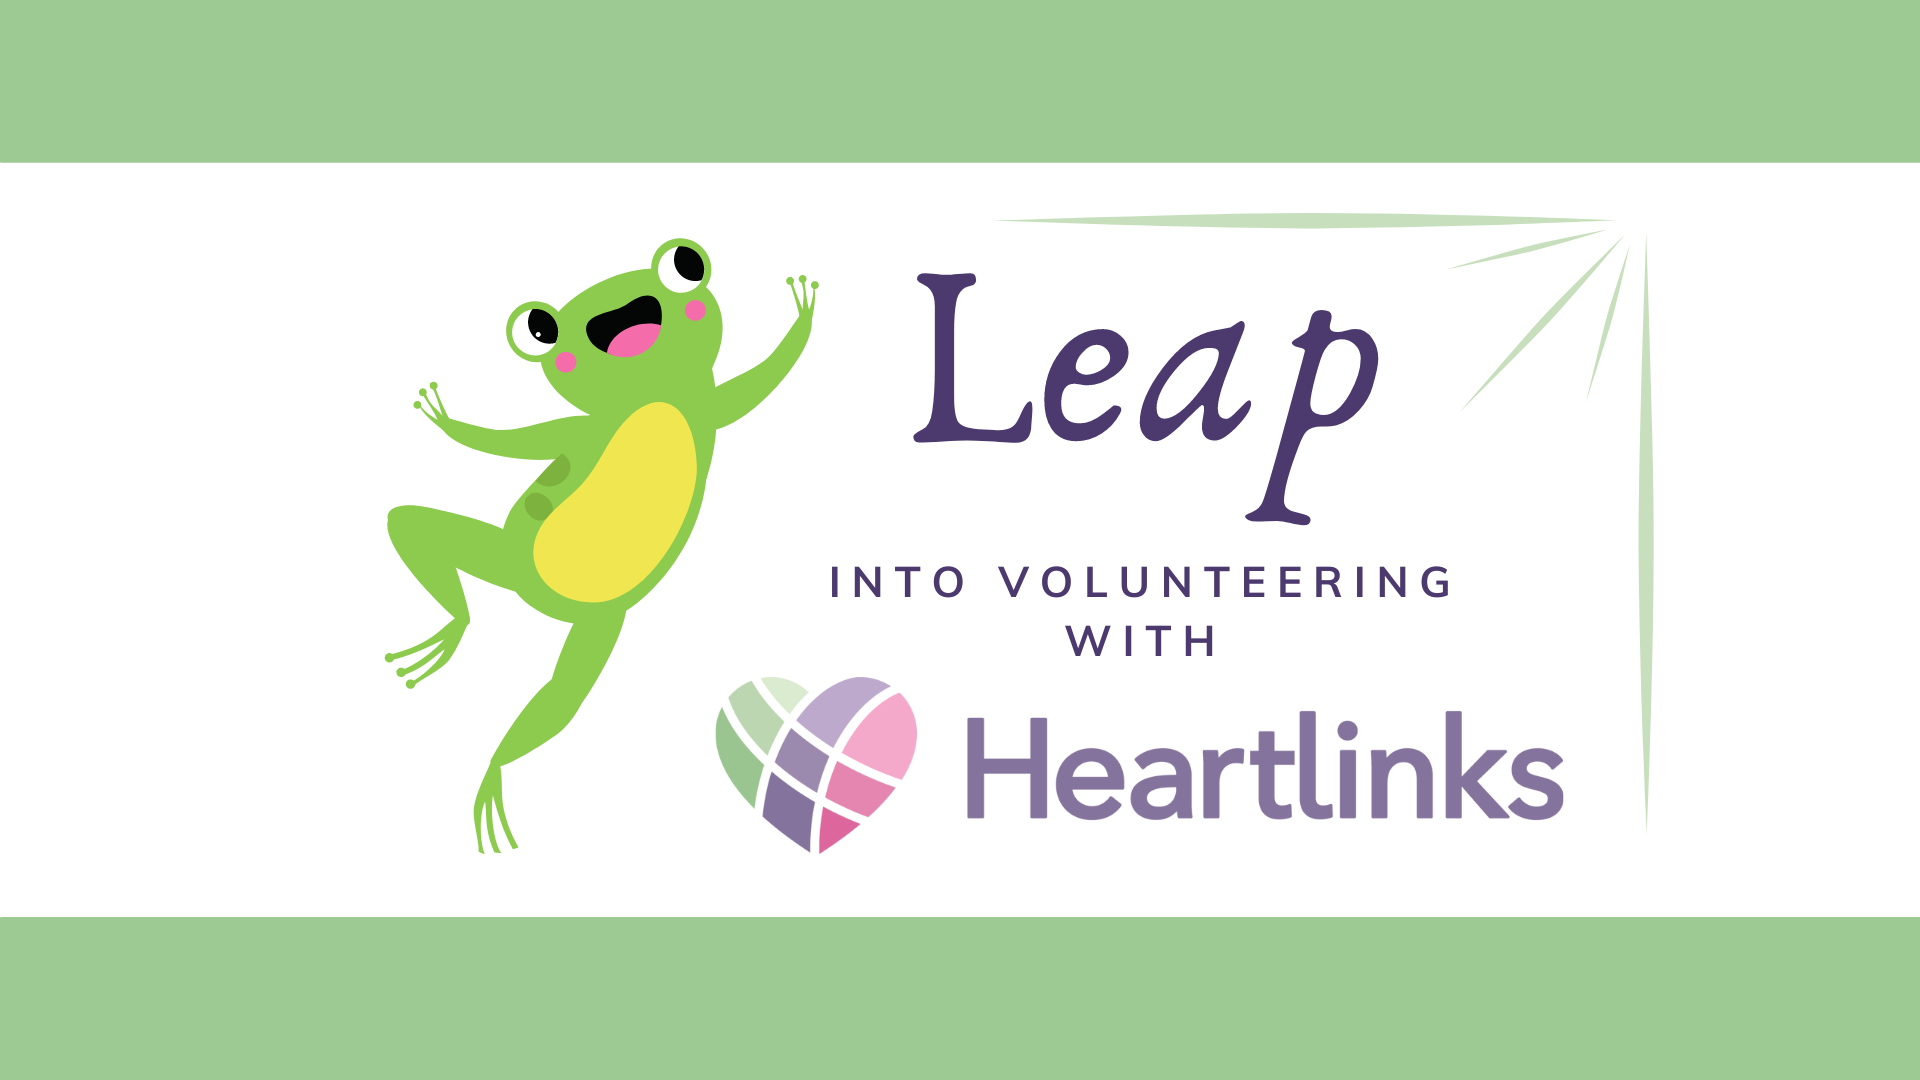 Leap into Volunteering With Heartlinks